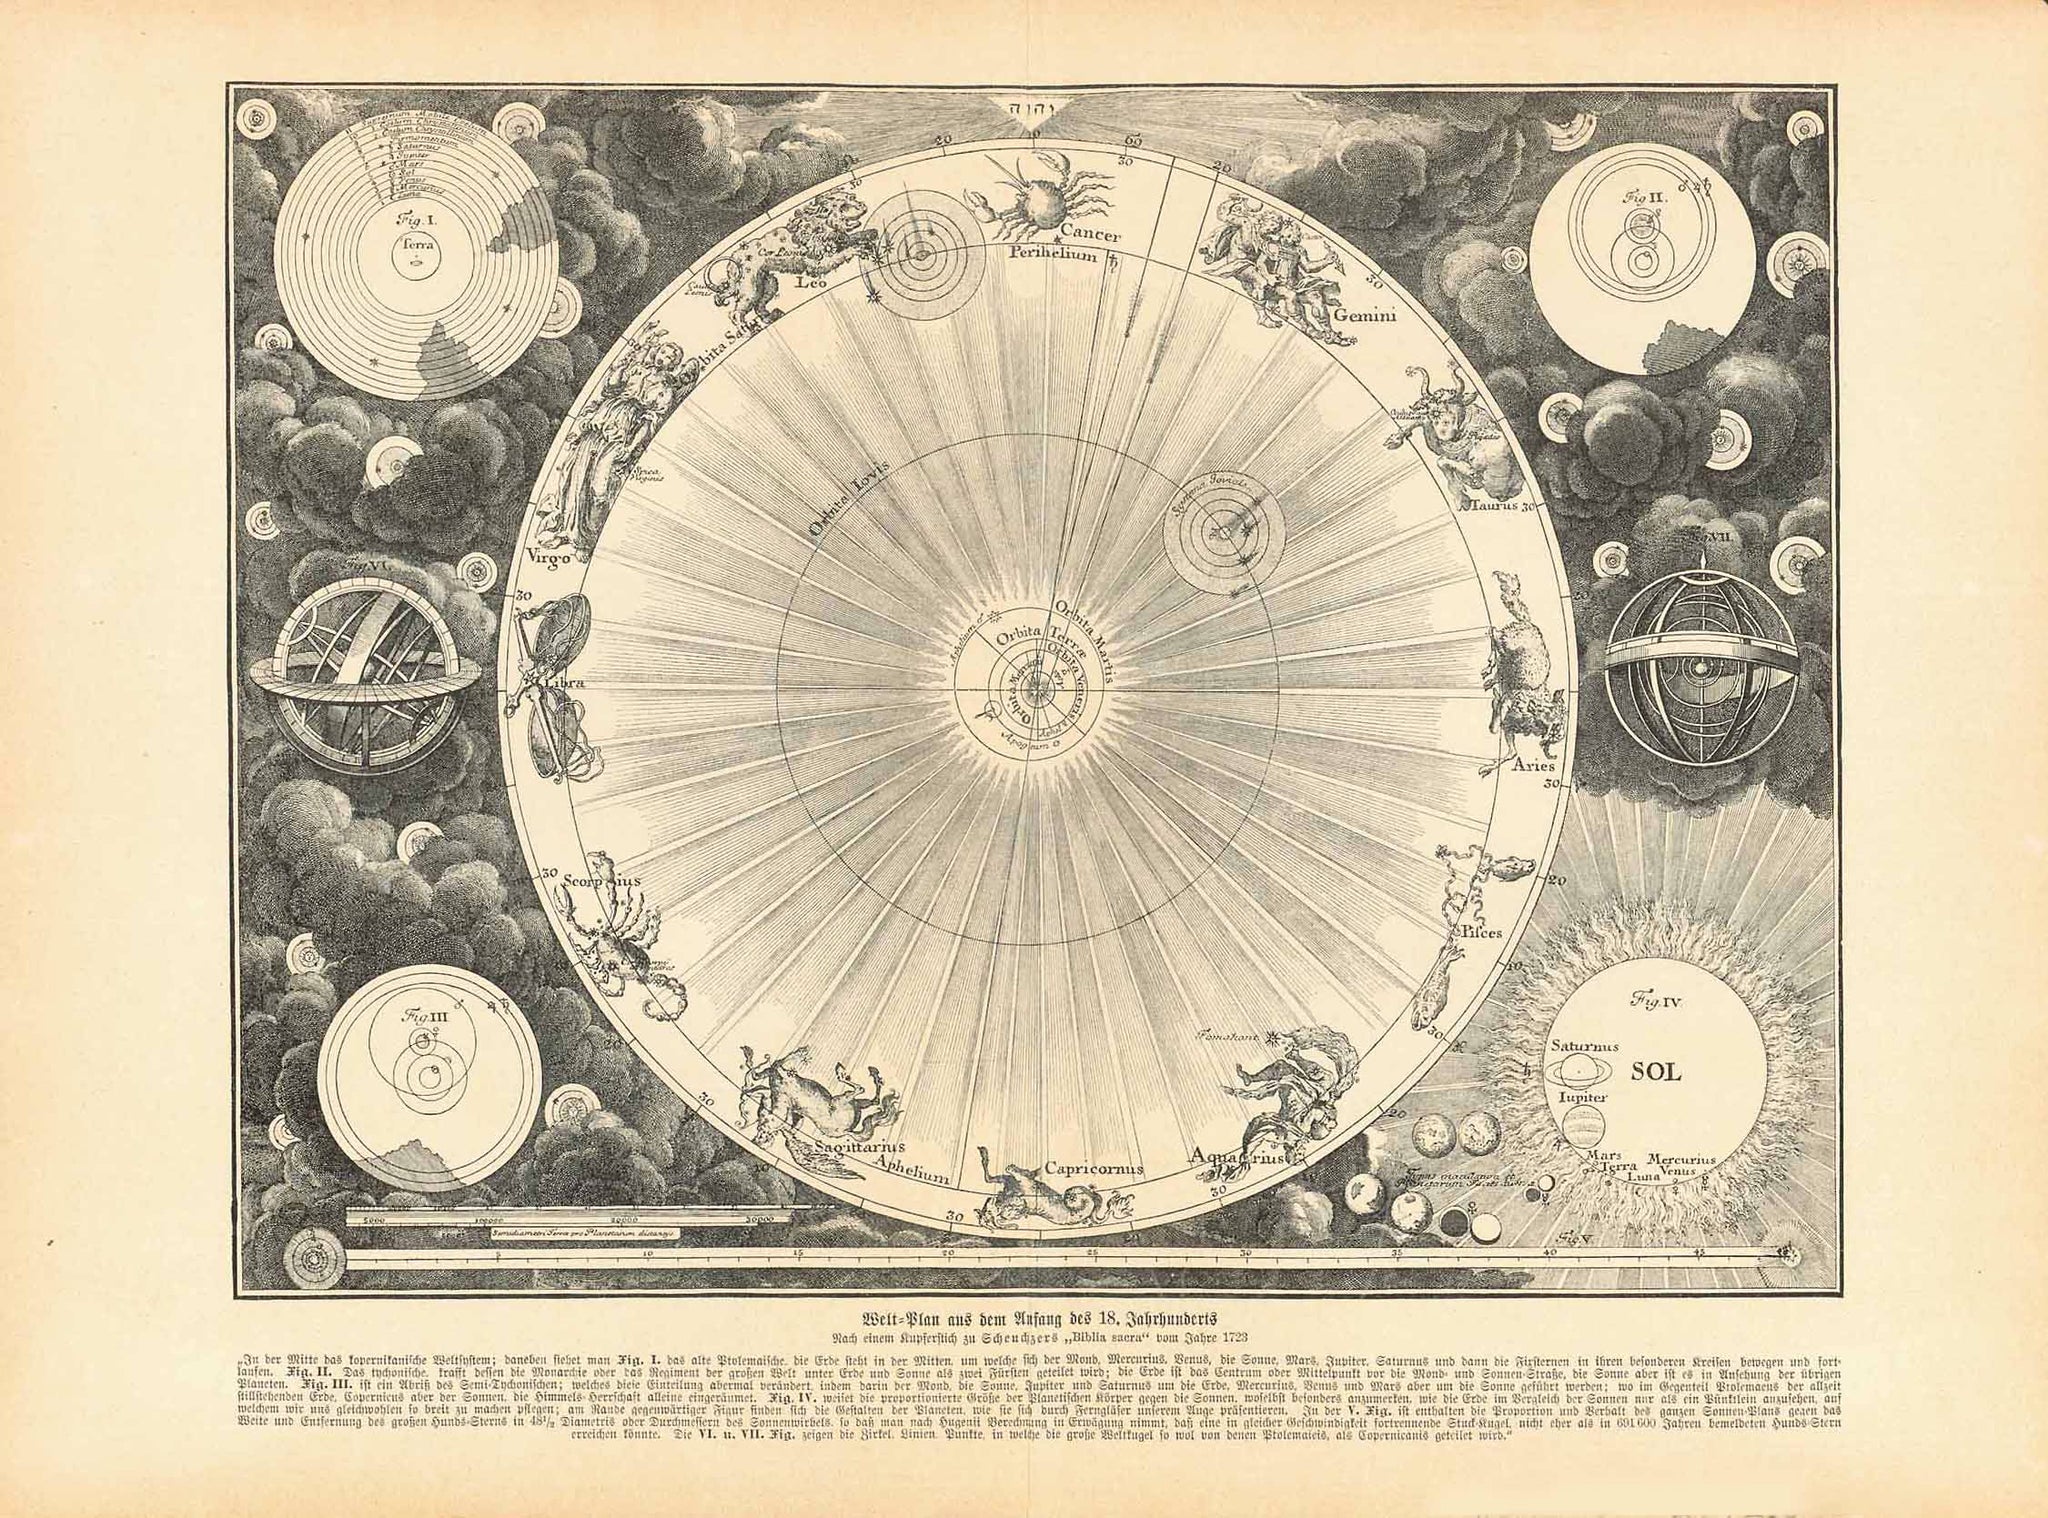 "Welt Plan aus dem Anfang des 18. Jahrhunderts"  Wood engraving 1900 showing astronomical systems at the beginning of the 18th Century. Below the title is very detailed information (in German) about the various images shown. This print was made from an older copper engraving printed. in 1723., interior design, wall decoration, ideas, idea, gift ideas, present, vintage, charming, special, decoration, home interior, living room design